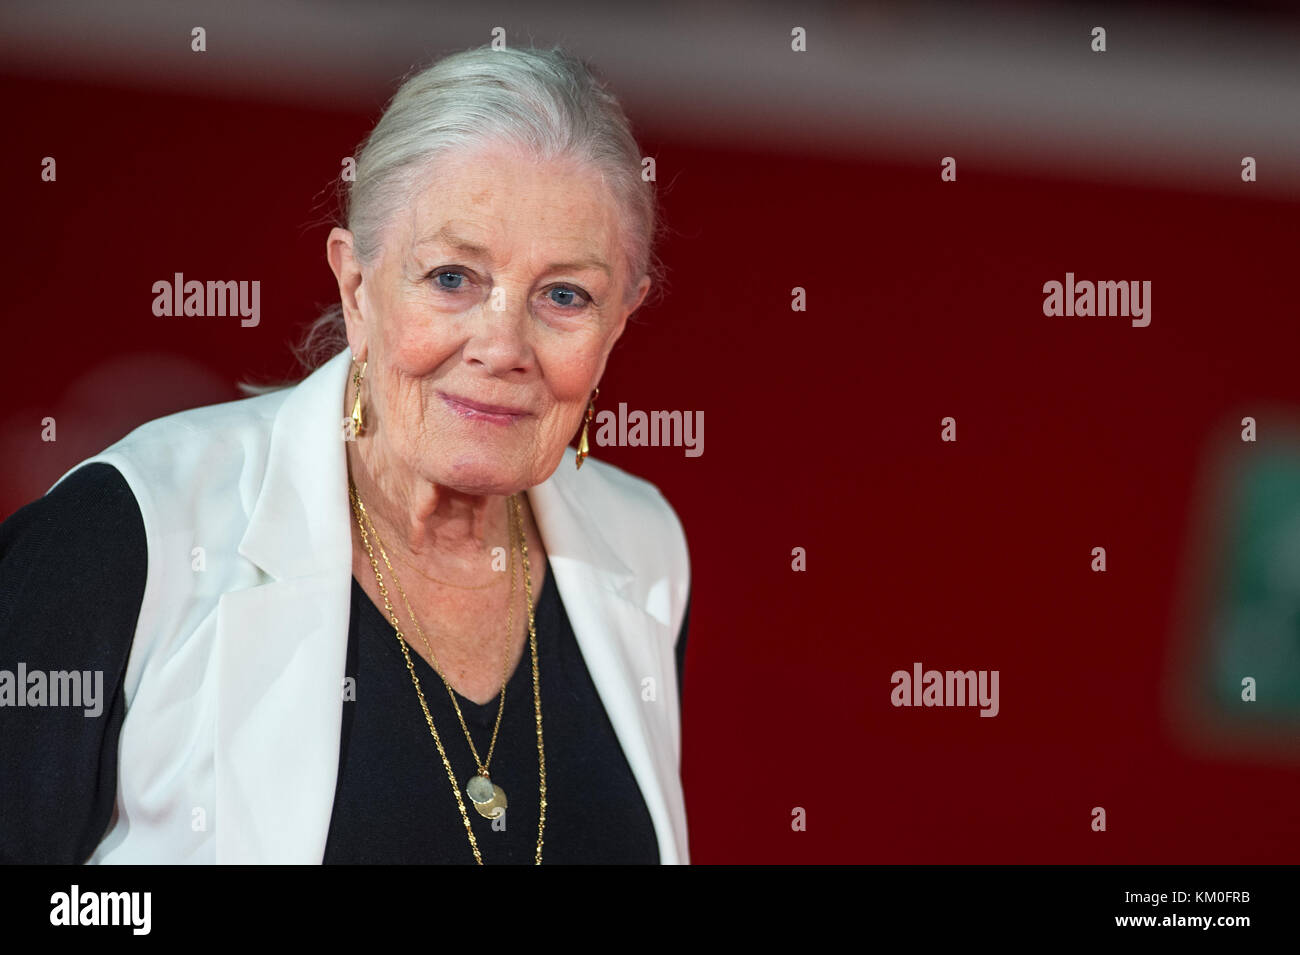 British actress Vanessa Redgrave on the red carpet during the 12th Rome Film Festival at the Auditorium Parco Della Musica in Rome, Italy.  Featuring: Vanessa Redgrave Where: Rome, Italy When: 02 Nov 2017 Credit: WENN.com Stock Photo